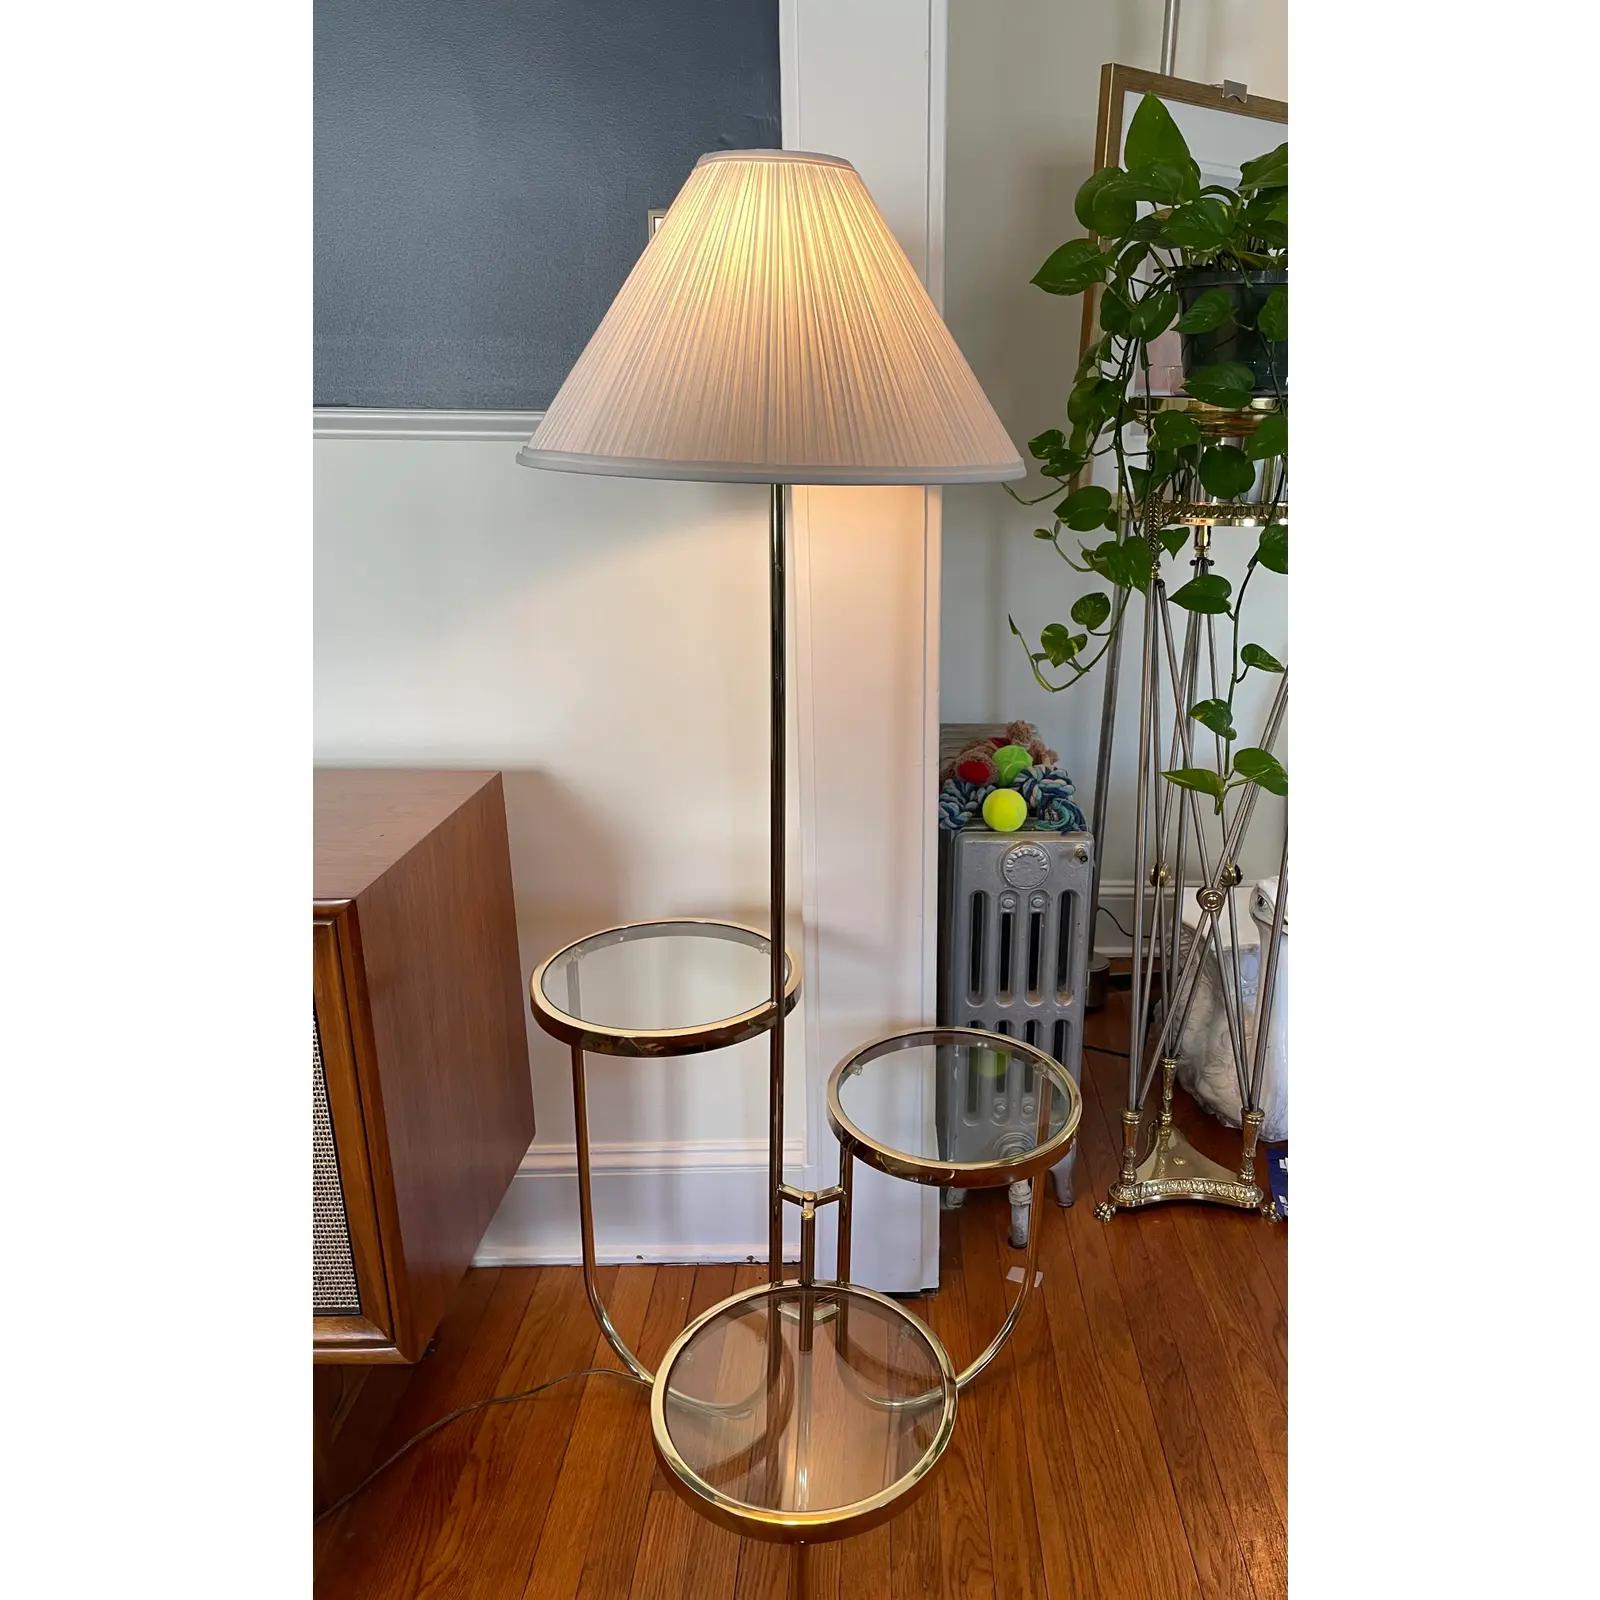 Unknown Vintage Mid Century Brass Floor Lamp With Three Circular Built-In Stand Tables For Sale